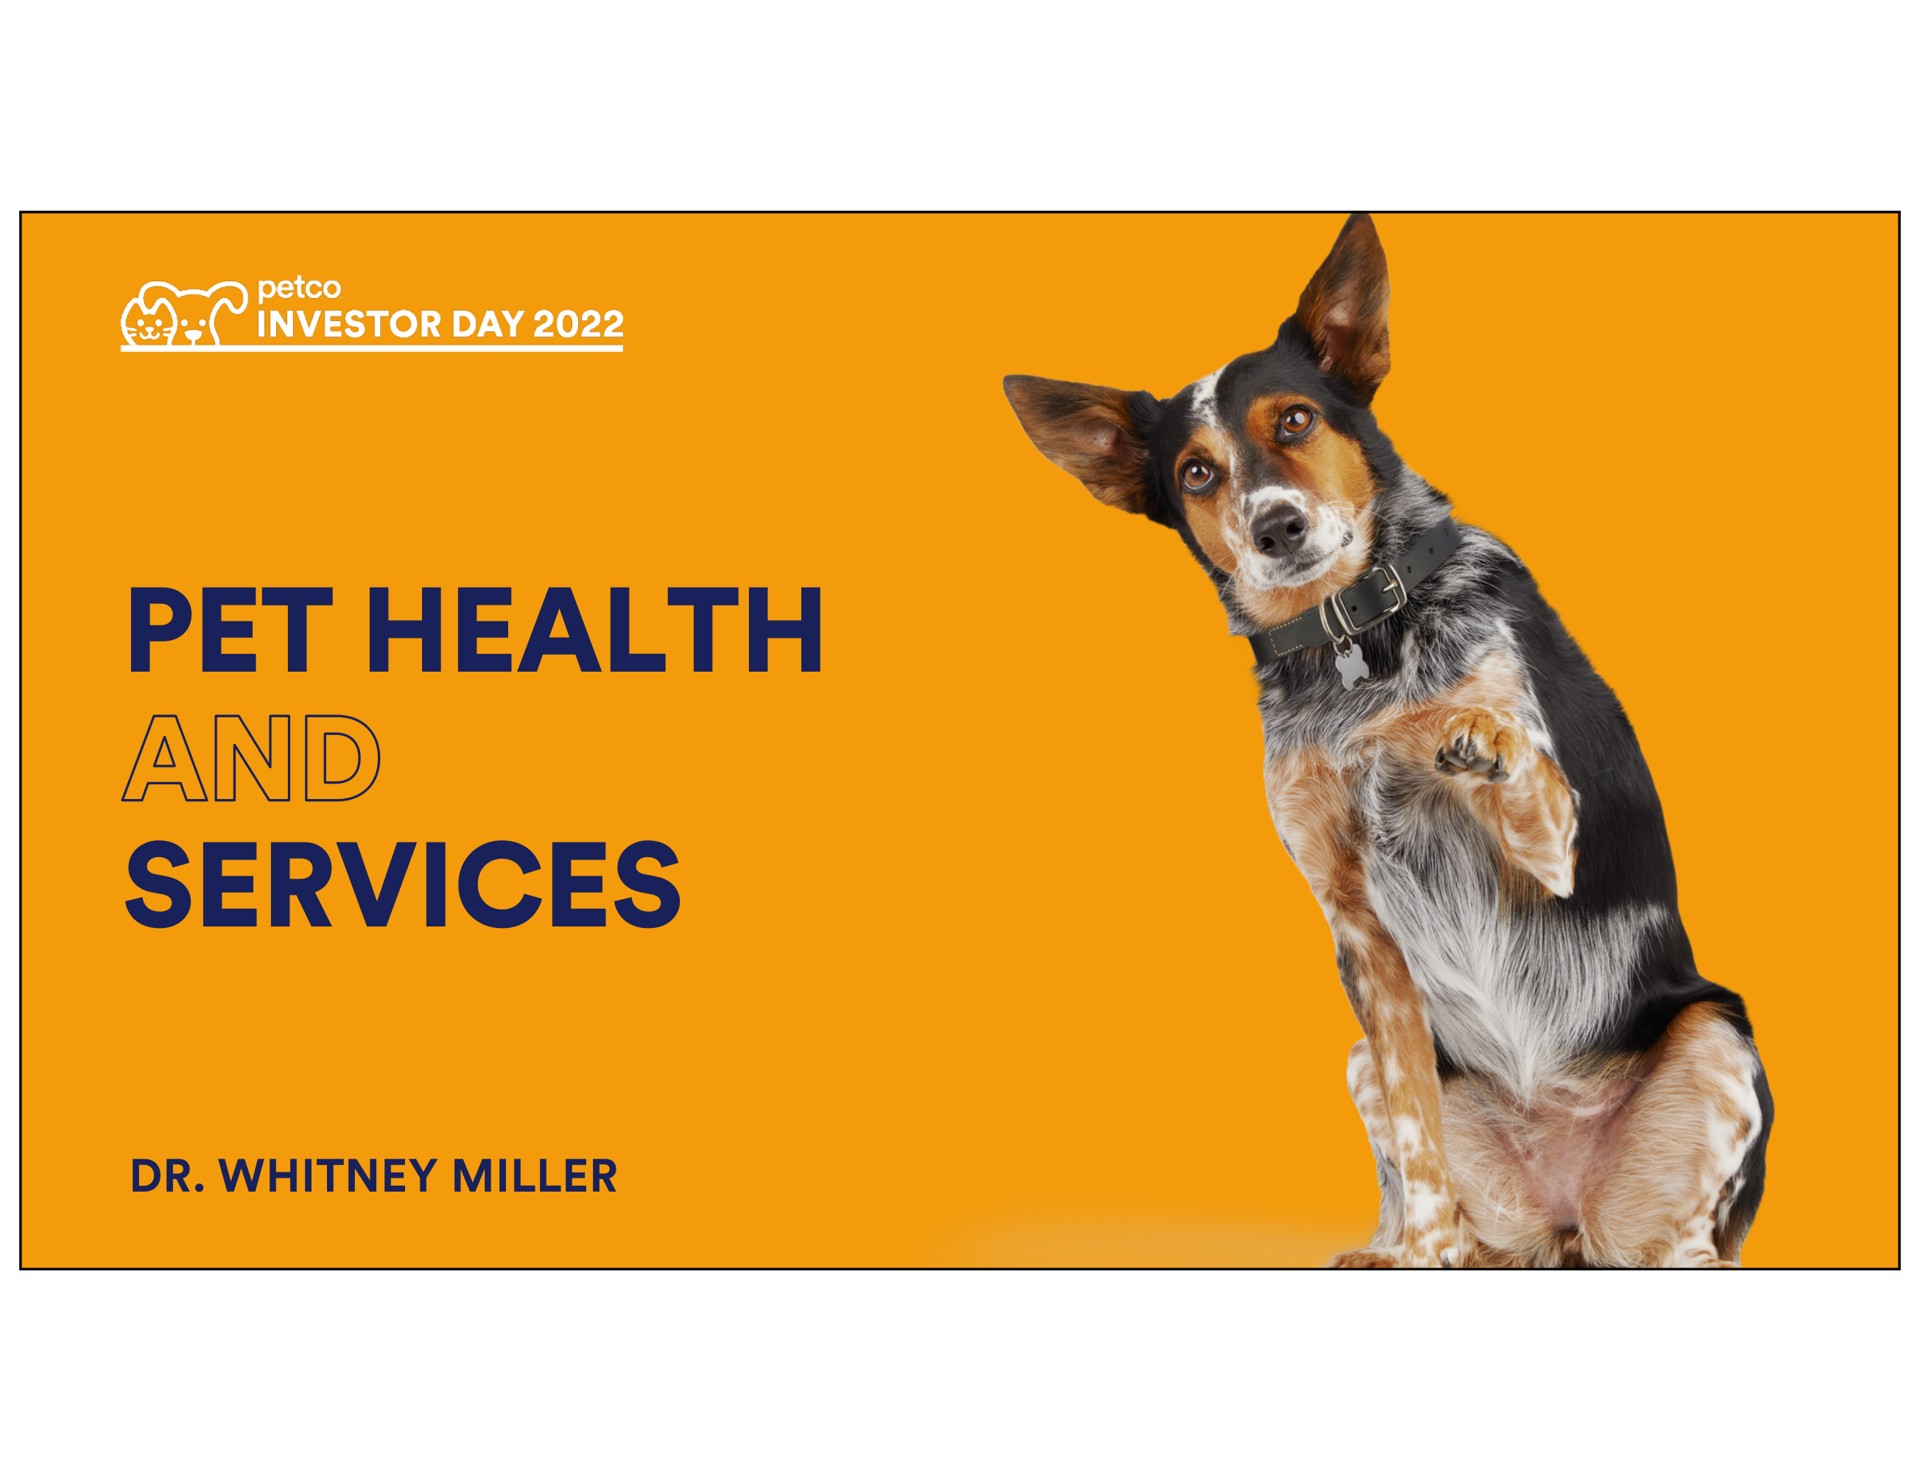 pet health services miller on a investor day | Petco